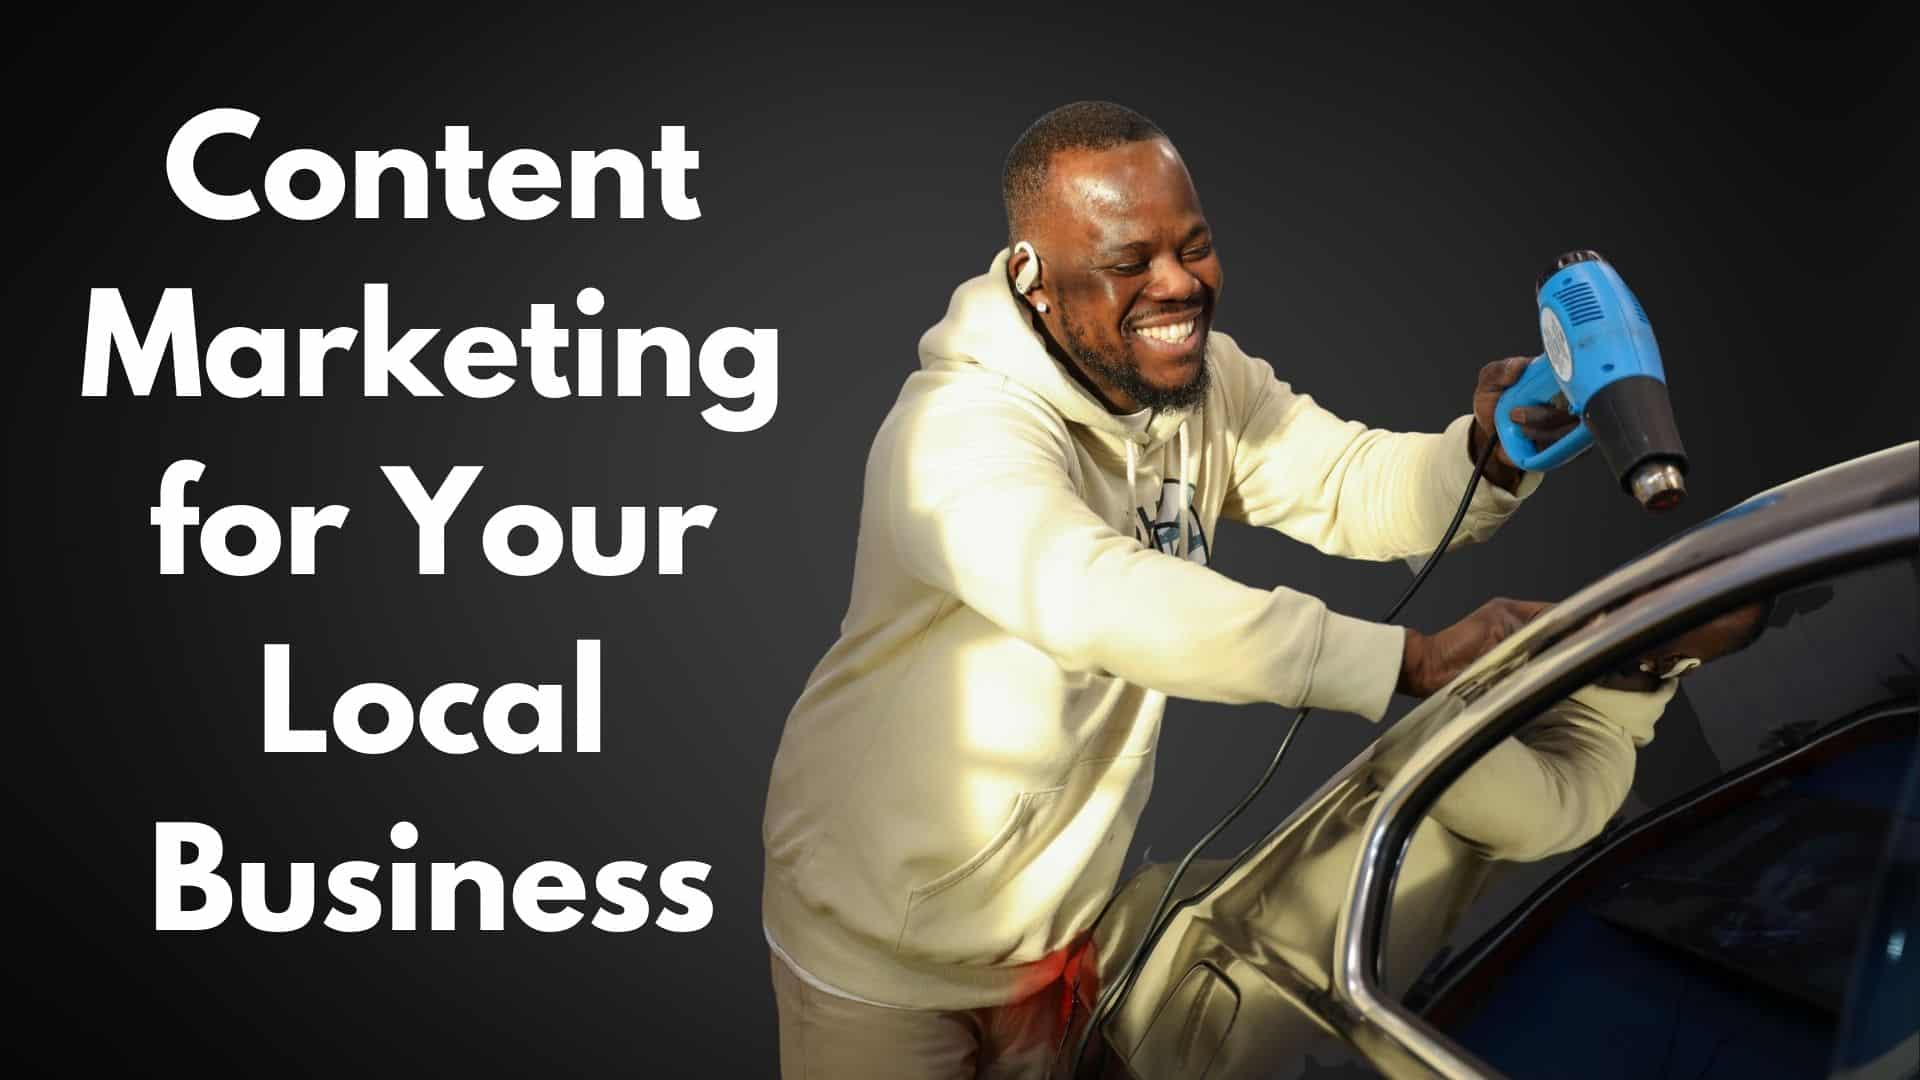 Content Marketing for Your Local Business